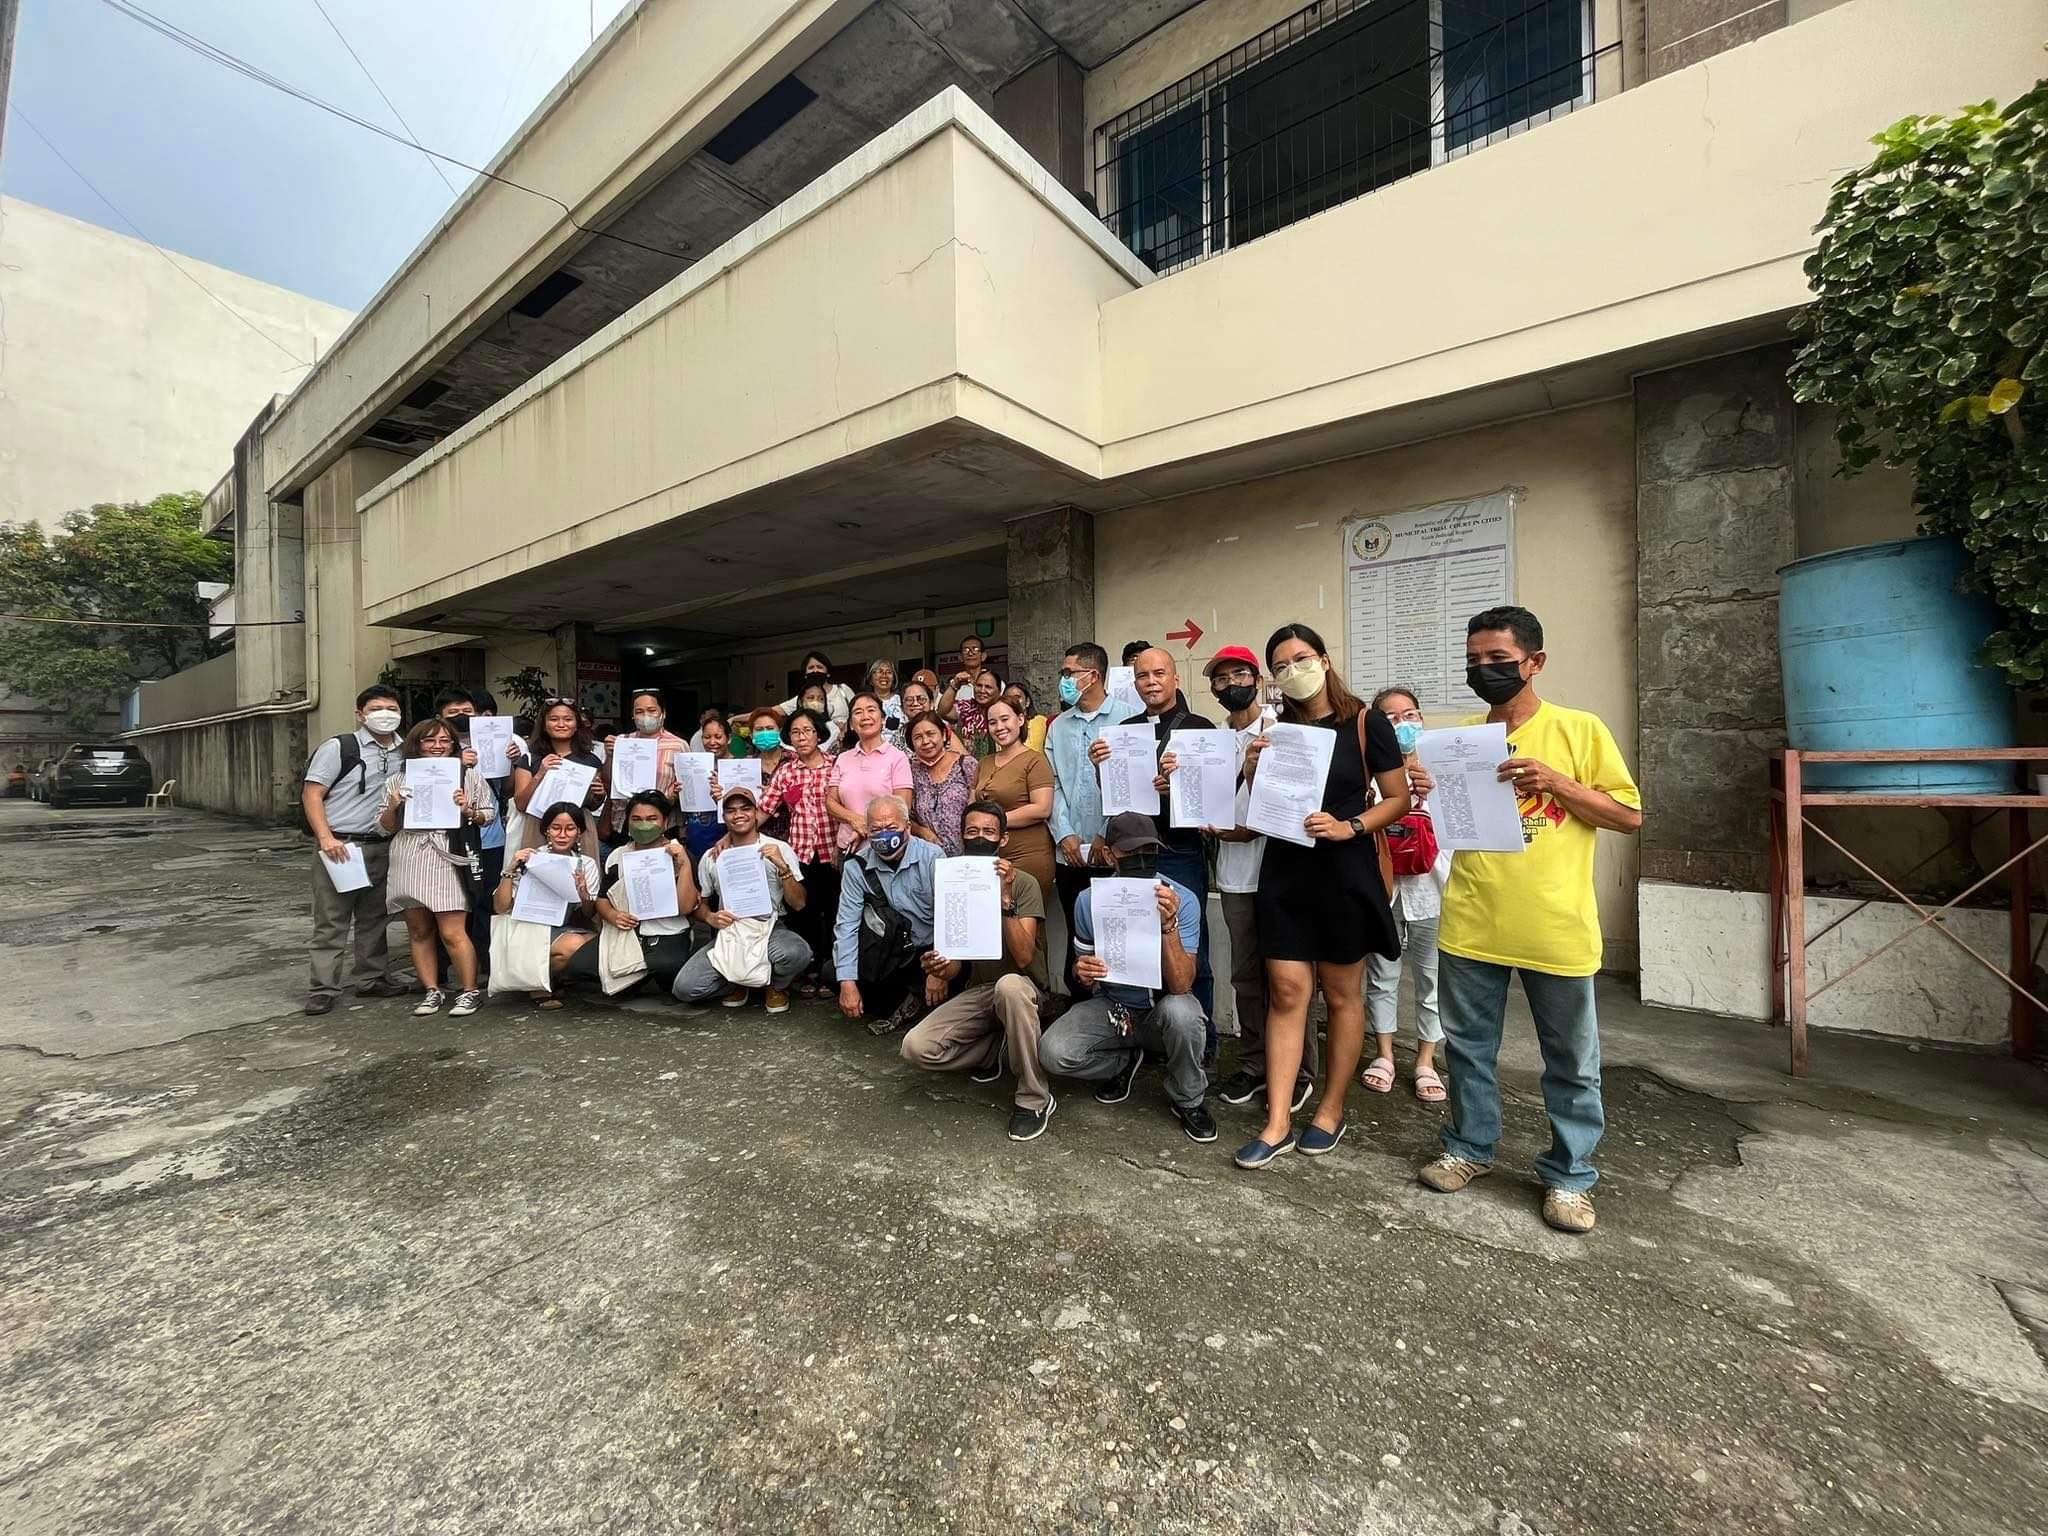 Iloilo judge acquits lawyer, 41 others of disobedience to authority in May 2020 rally